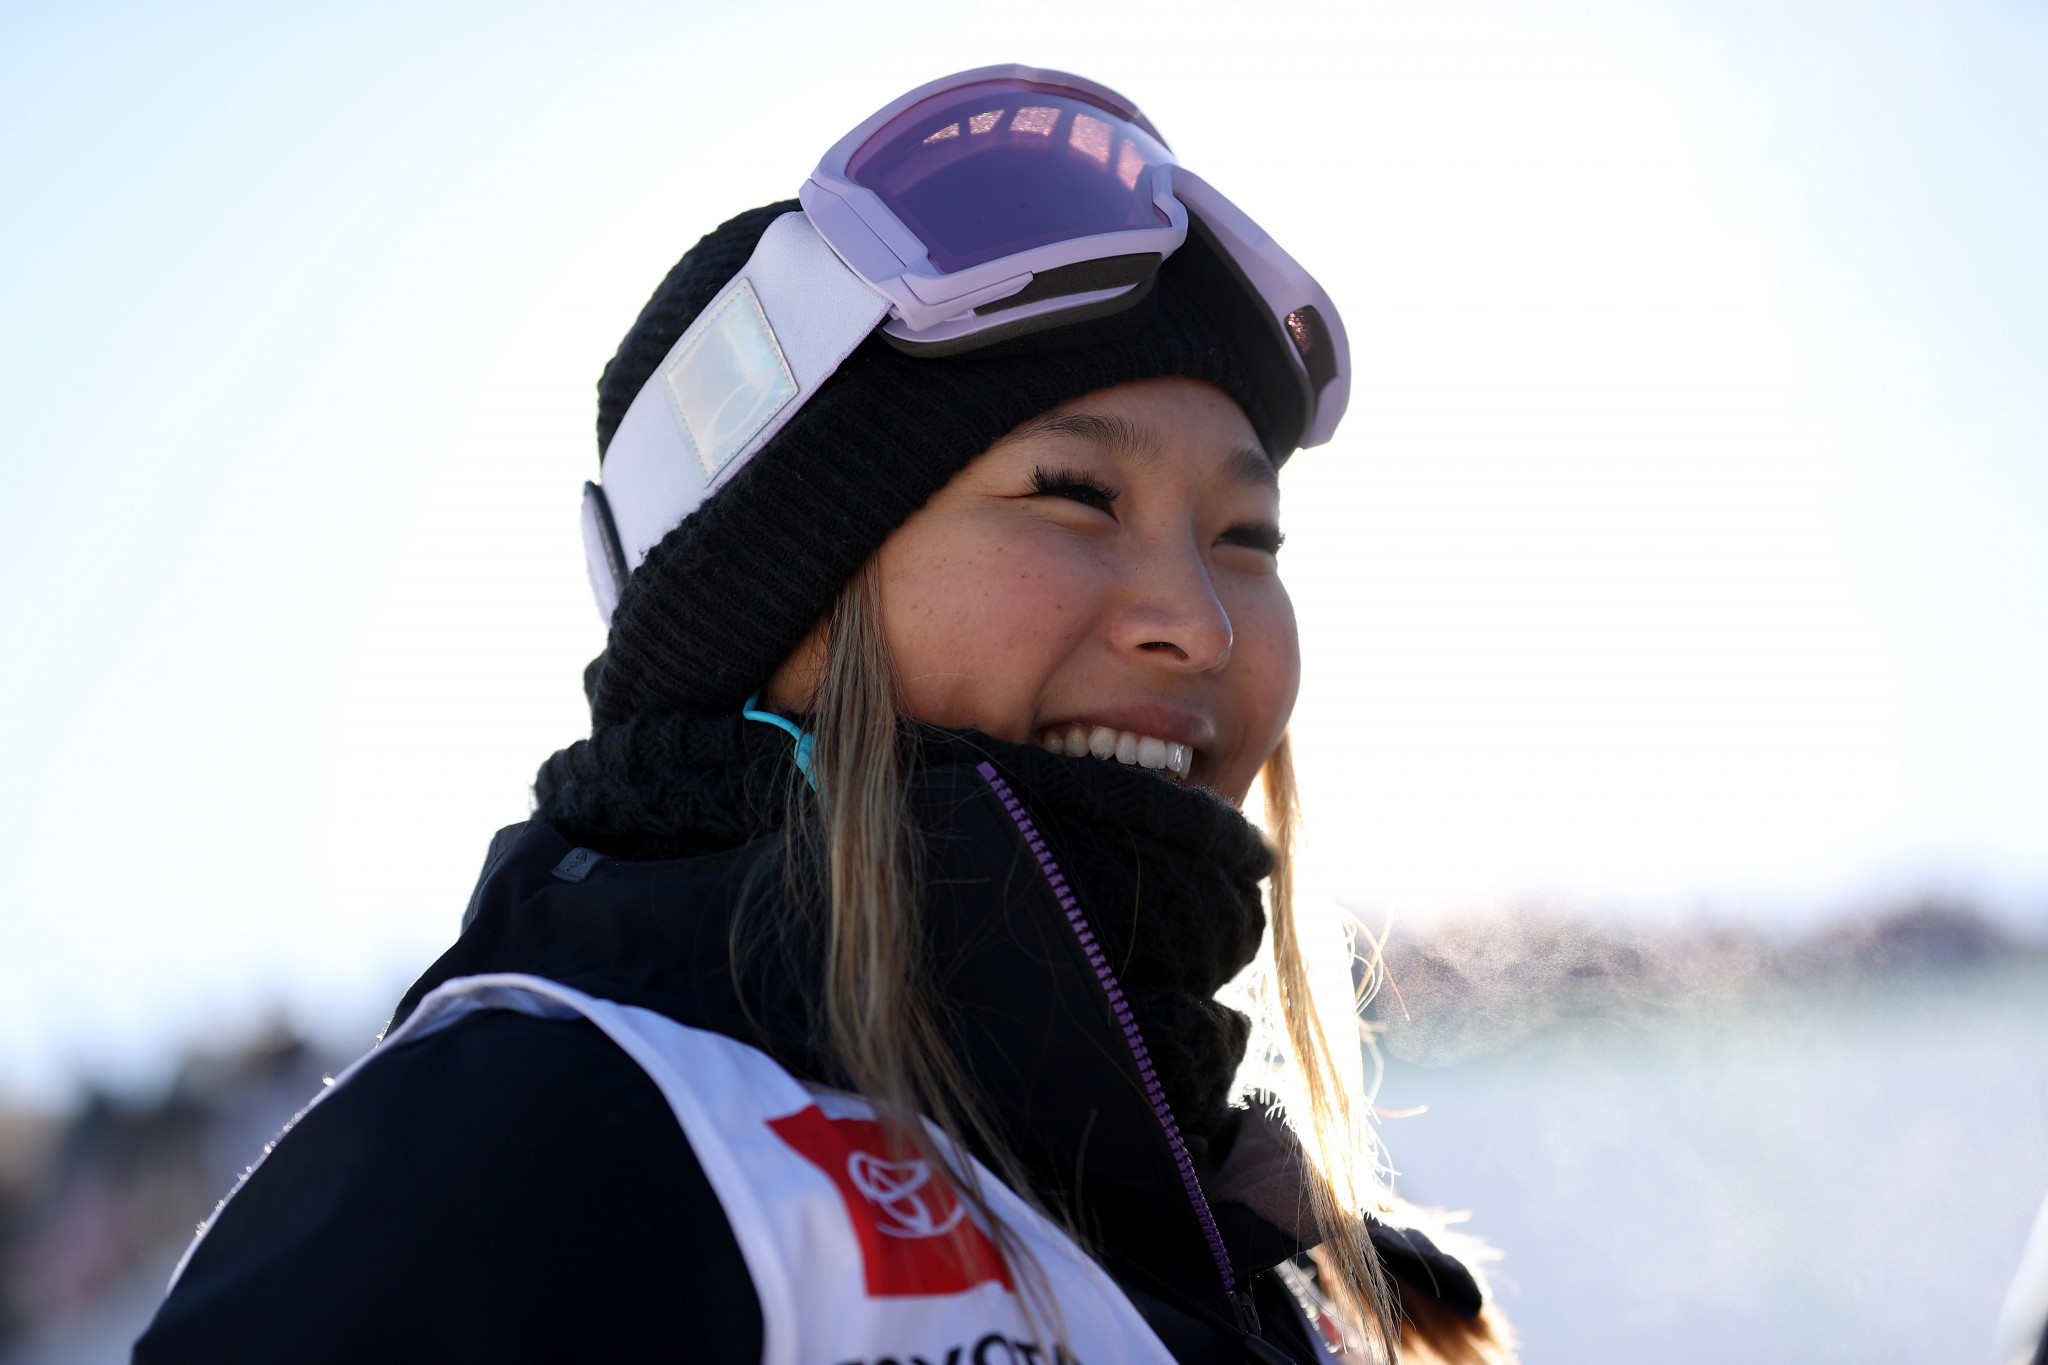 Snowboard halfpipe World Cup champions crowned as Kim and Hirano win final round of season